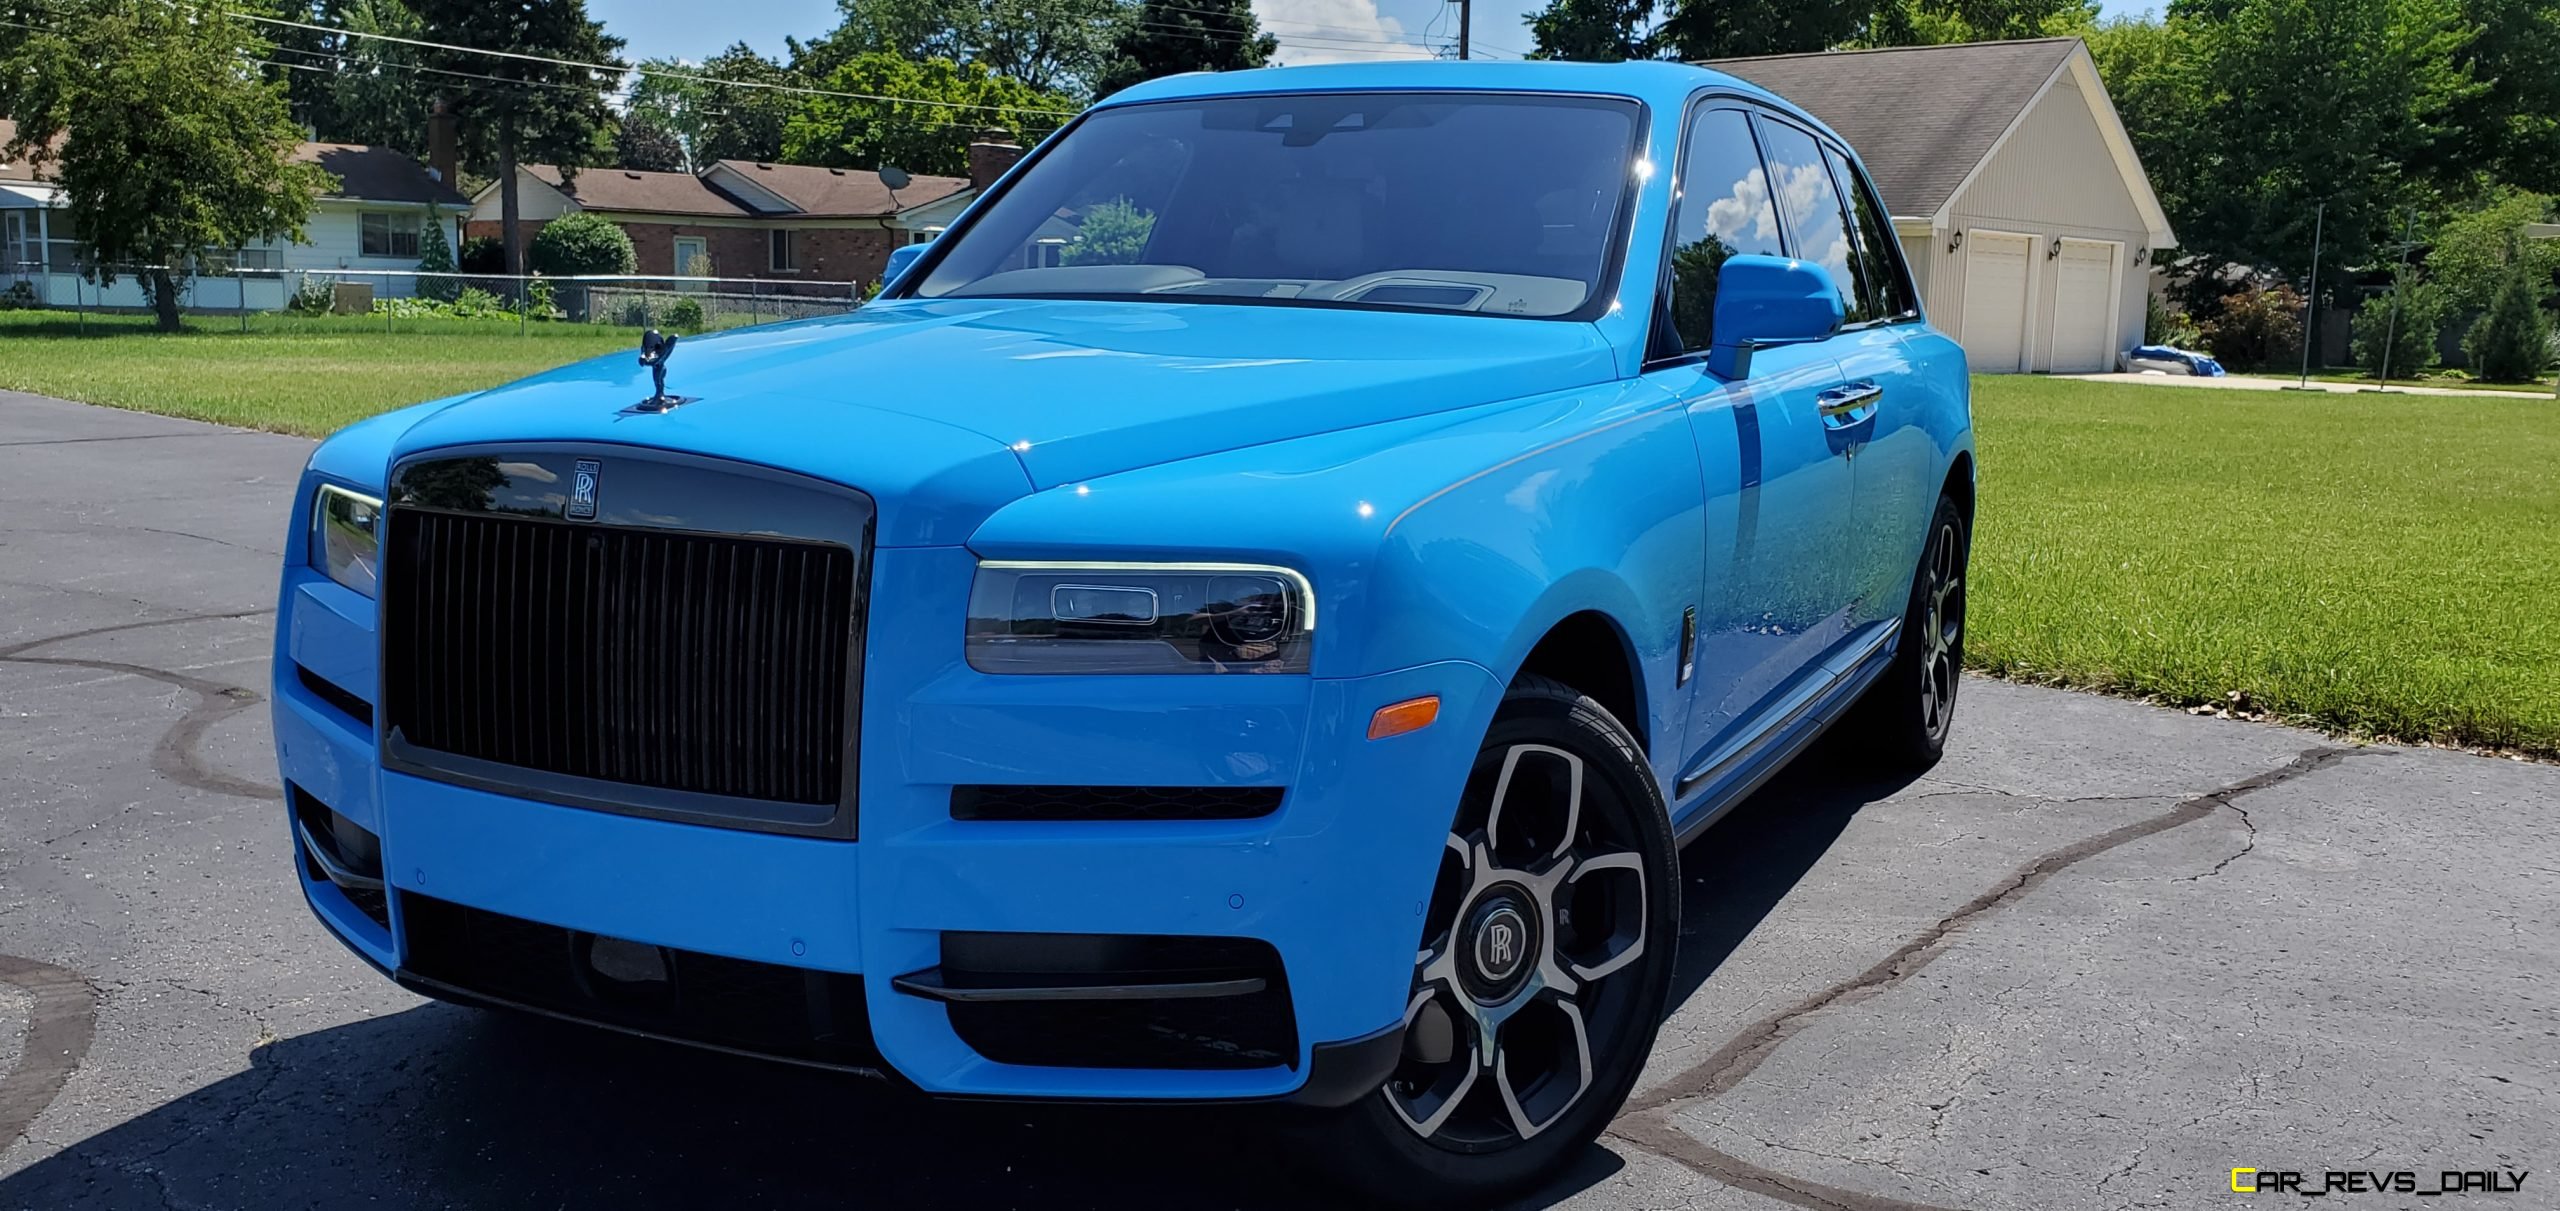 Rolls-Royce races to catch up to demand for Cullinan SUV